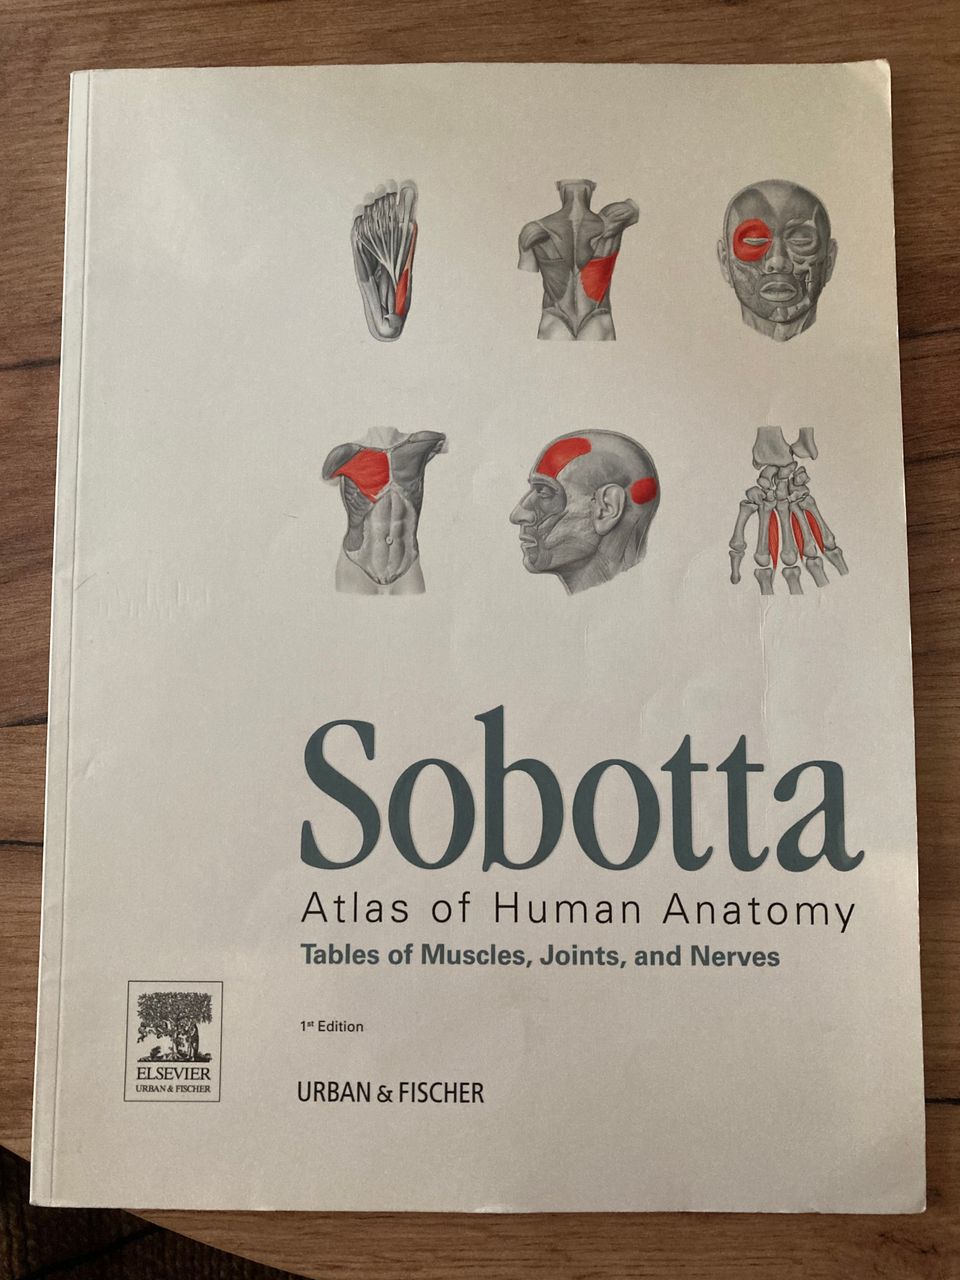 Sobotta tables of muscles, joints and nerves